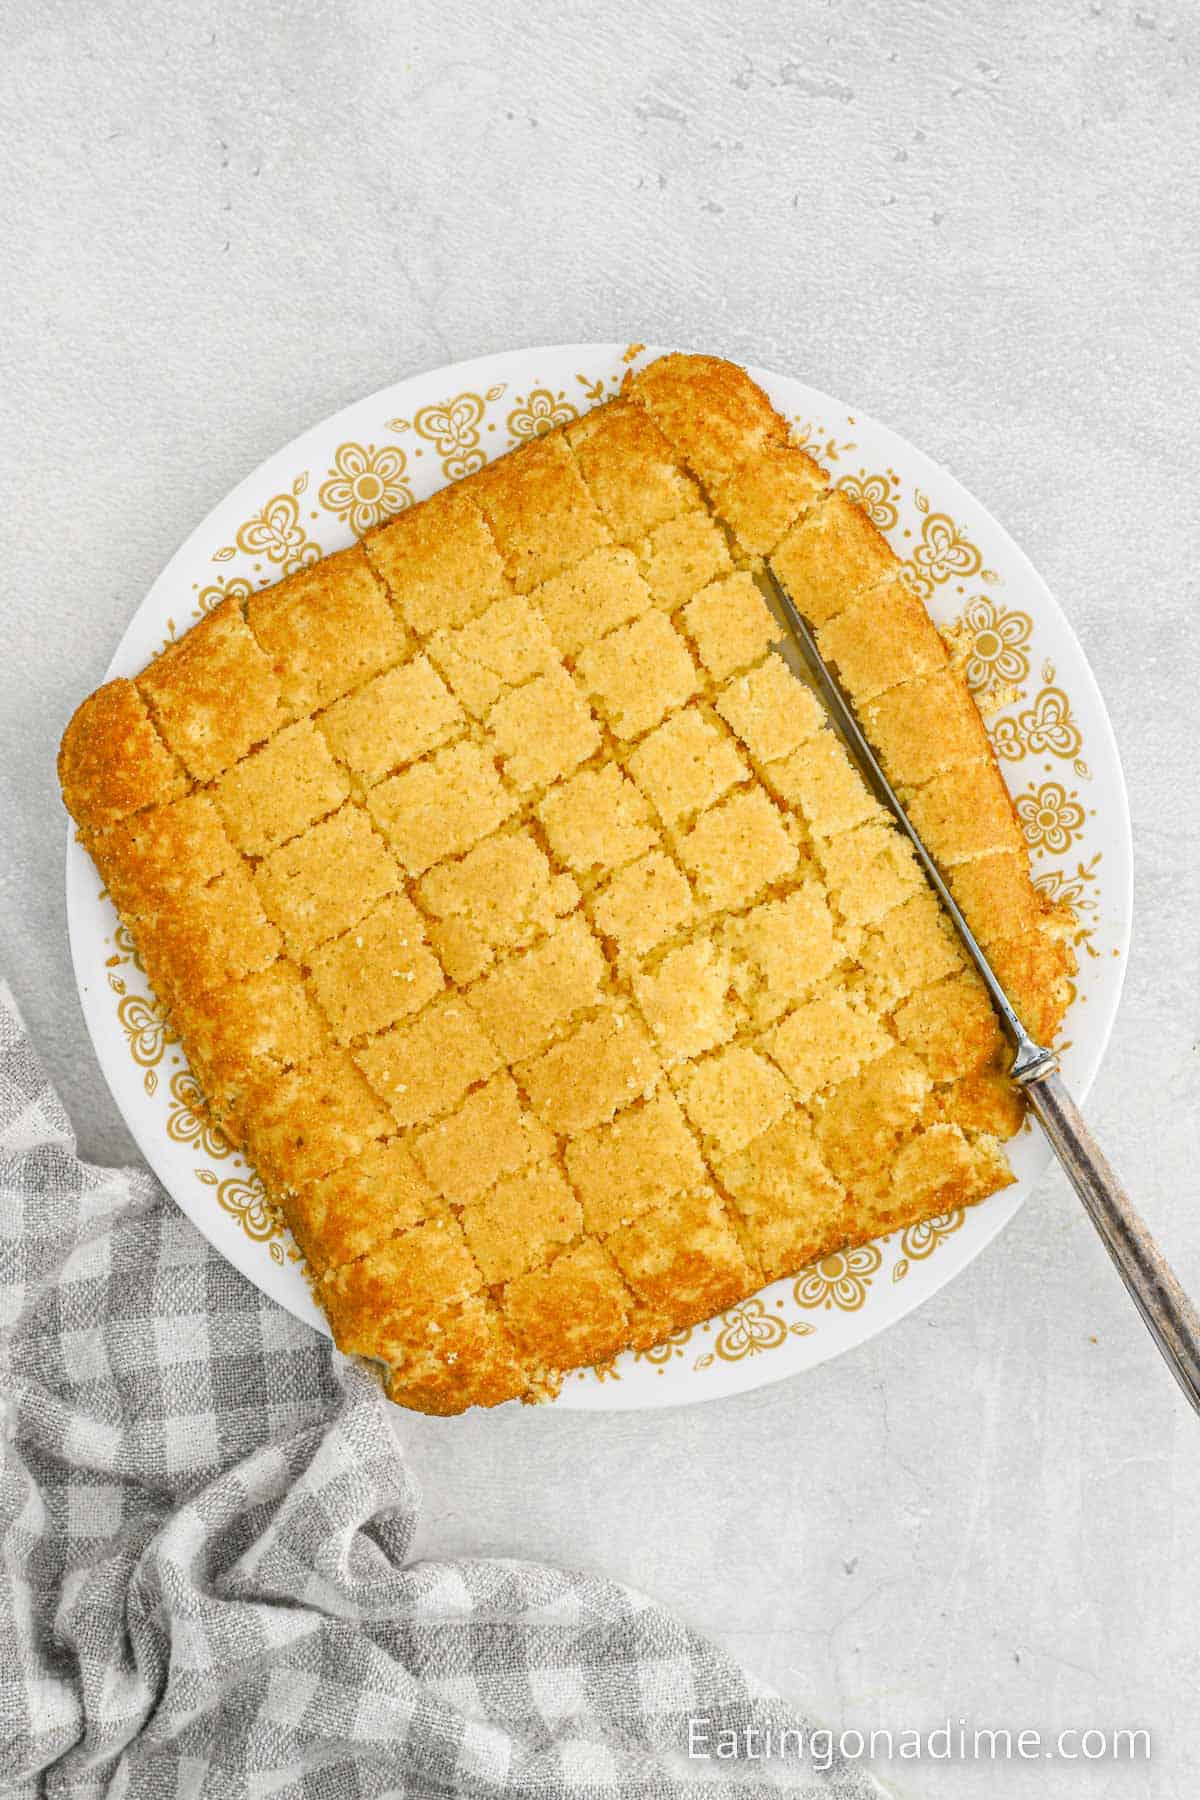 Cutting the baked cornbread into cubes on a plate